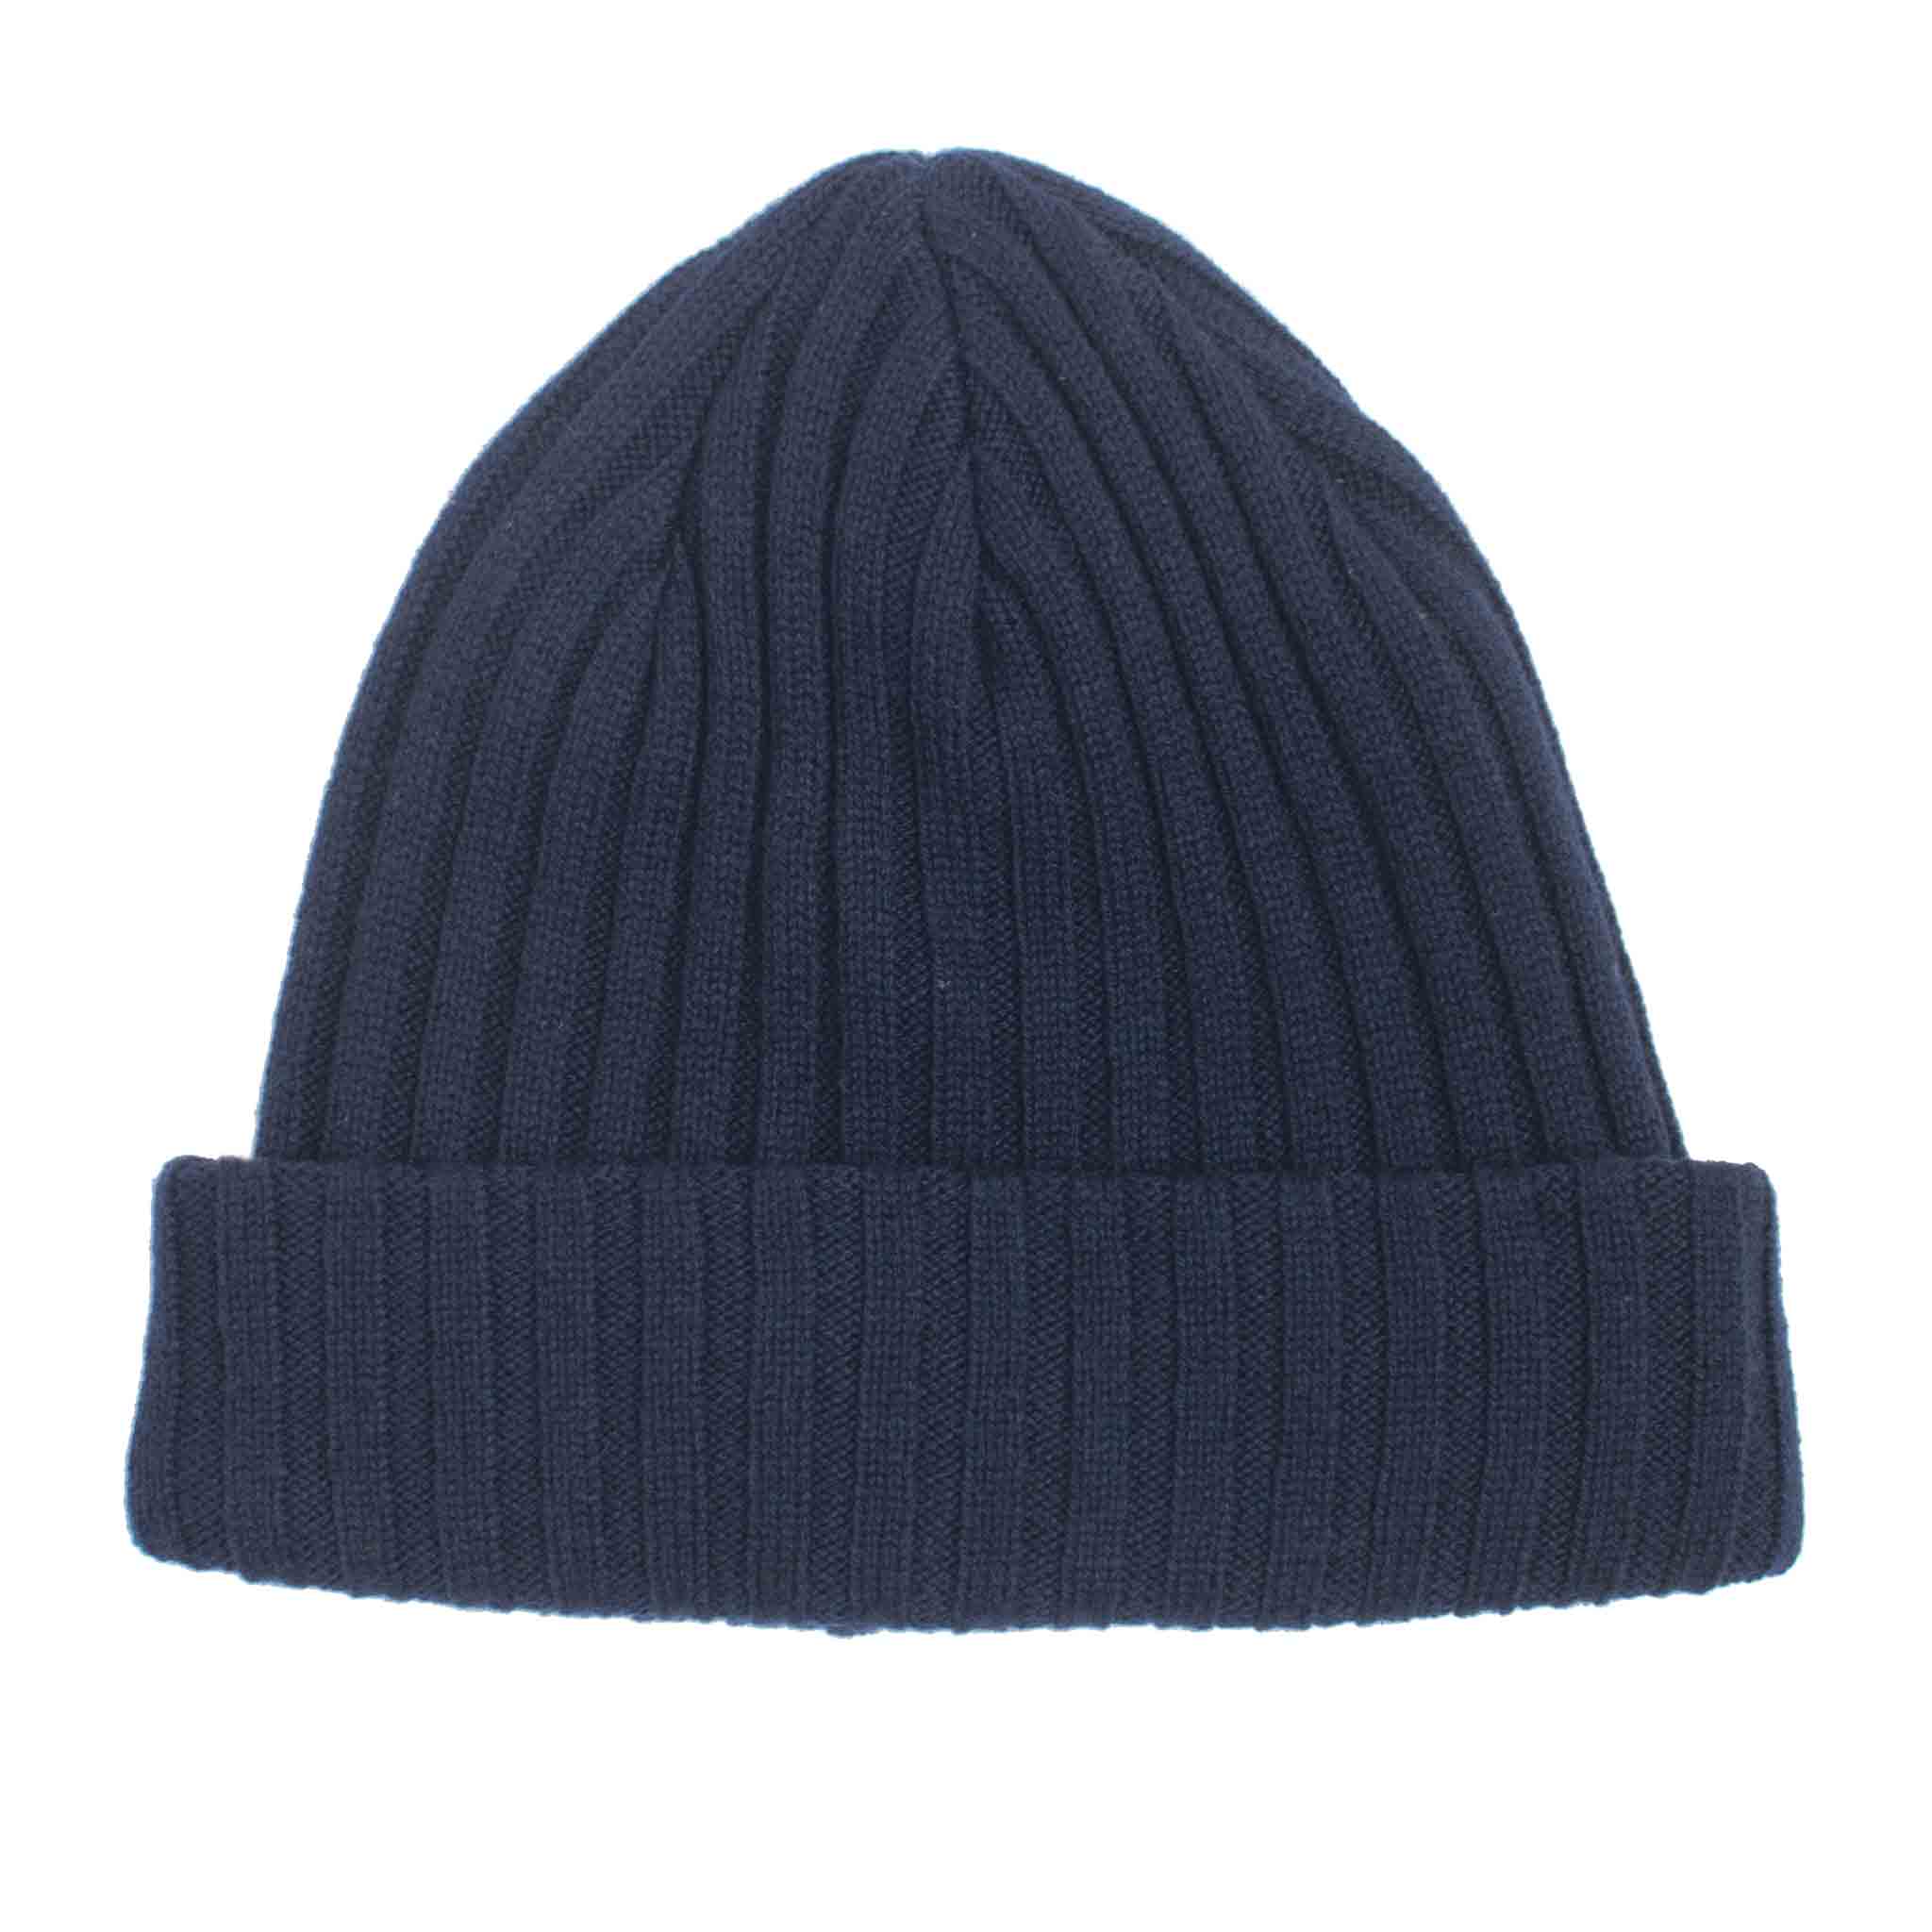 The Real McCoy's MA21105 Wool Cashmere Knit Cap Navy